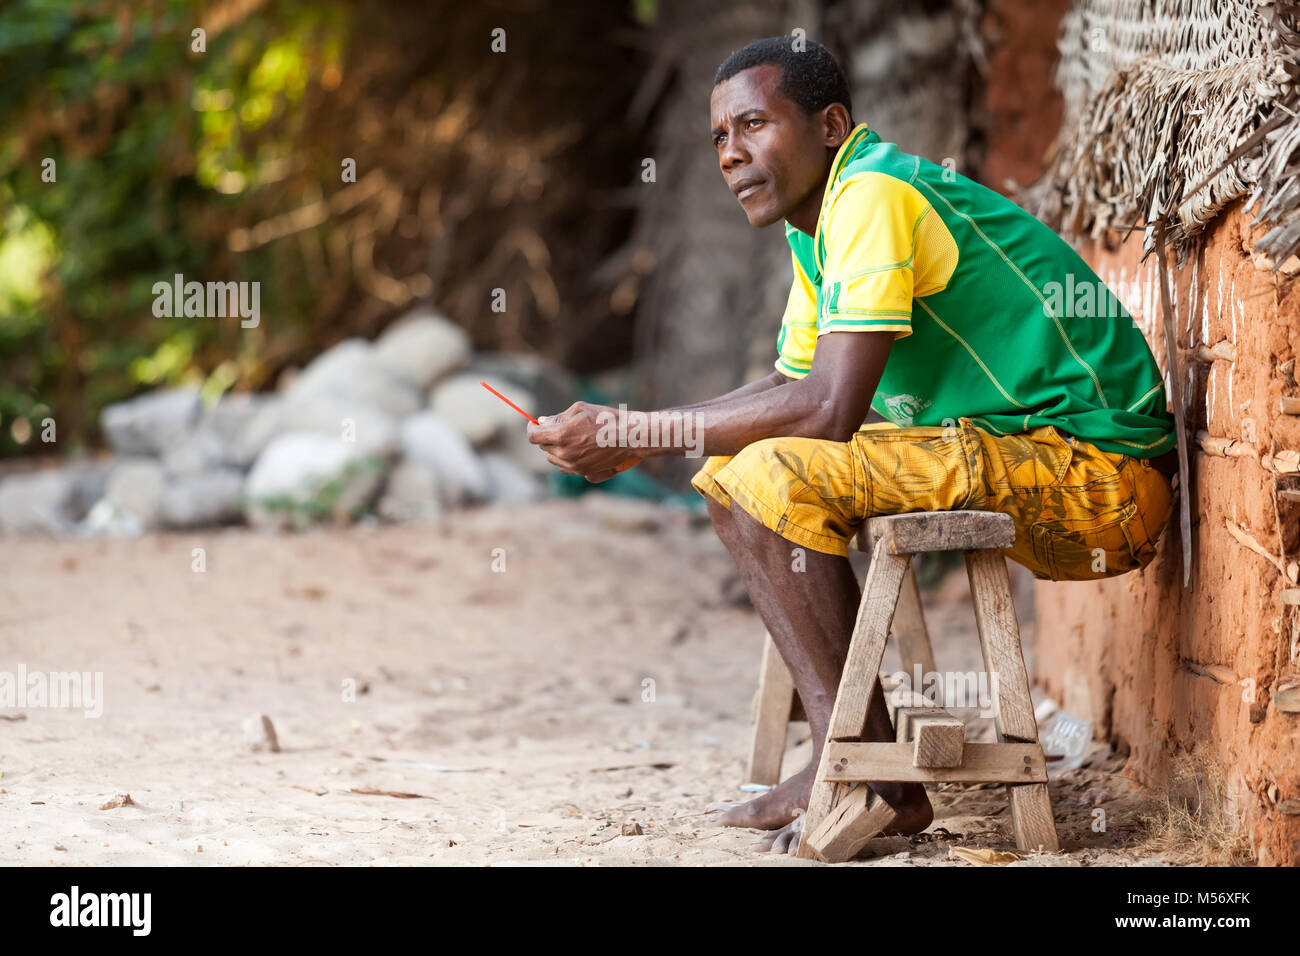 Stone Town, Zanzibar - January 20, 2015: Man sitting on wooden bench looking to the distance Stock Photo